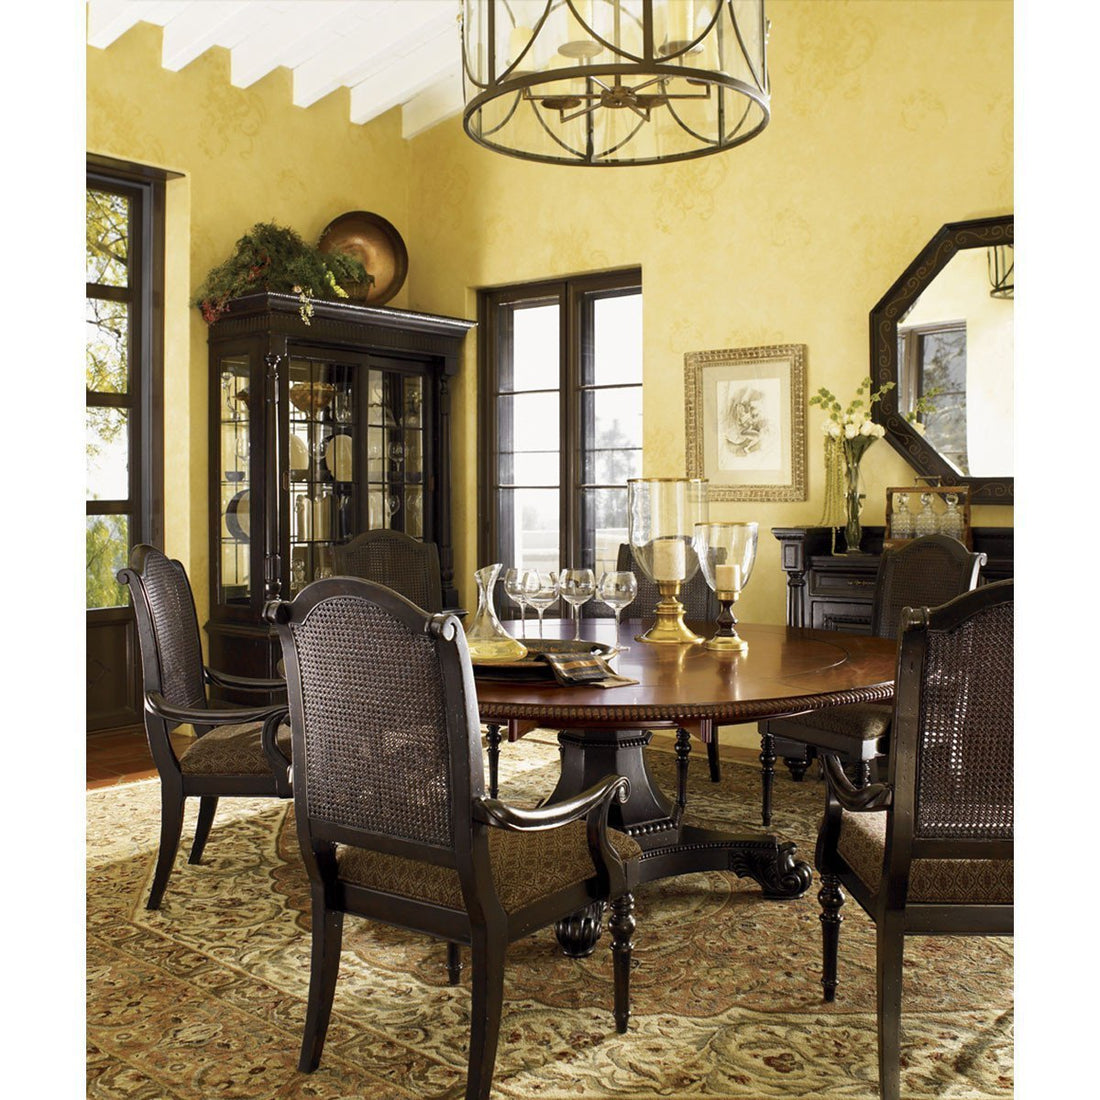 Tommy Bahama Kingstown Bonaire Round Dining Table 621-870C